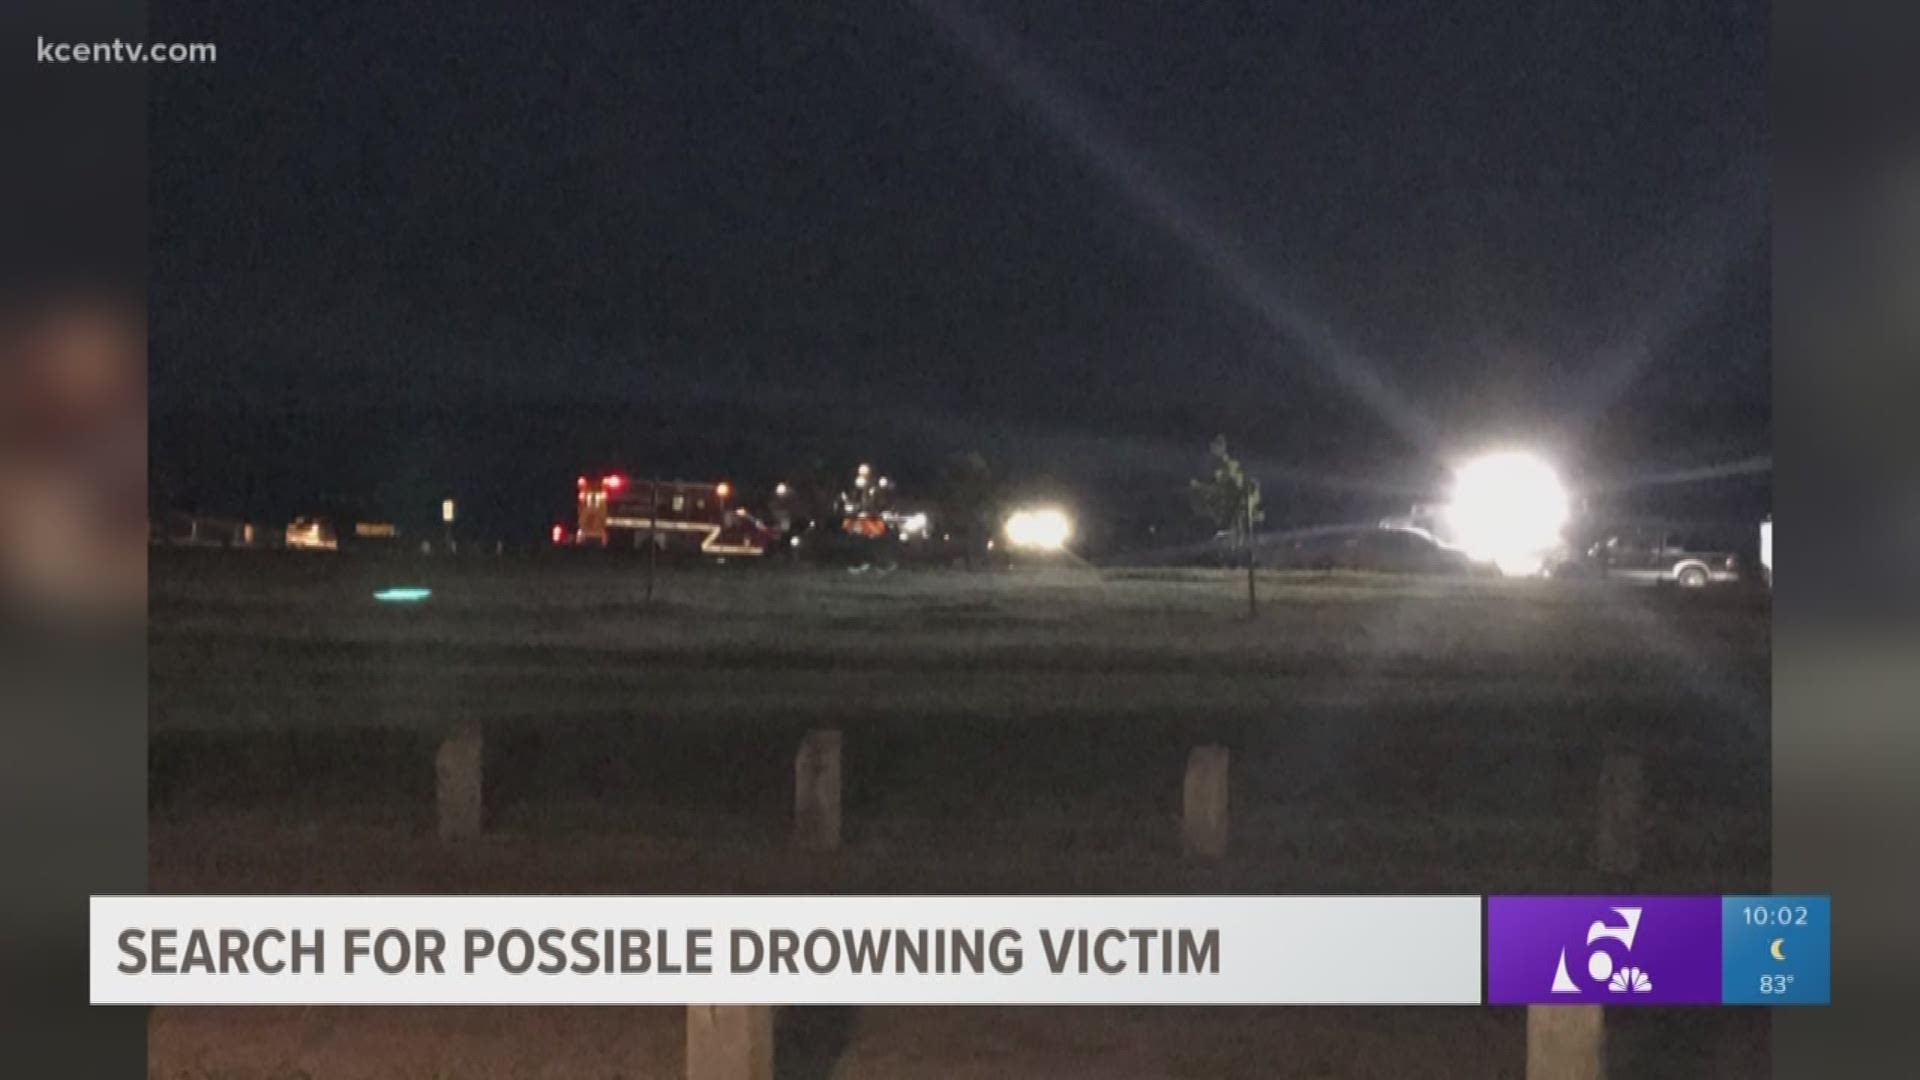 Crews were searching for a possible drowning victim at Dana Peak Park Saturday evening.